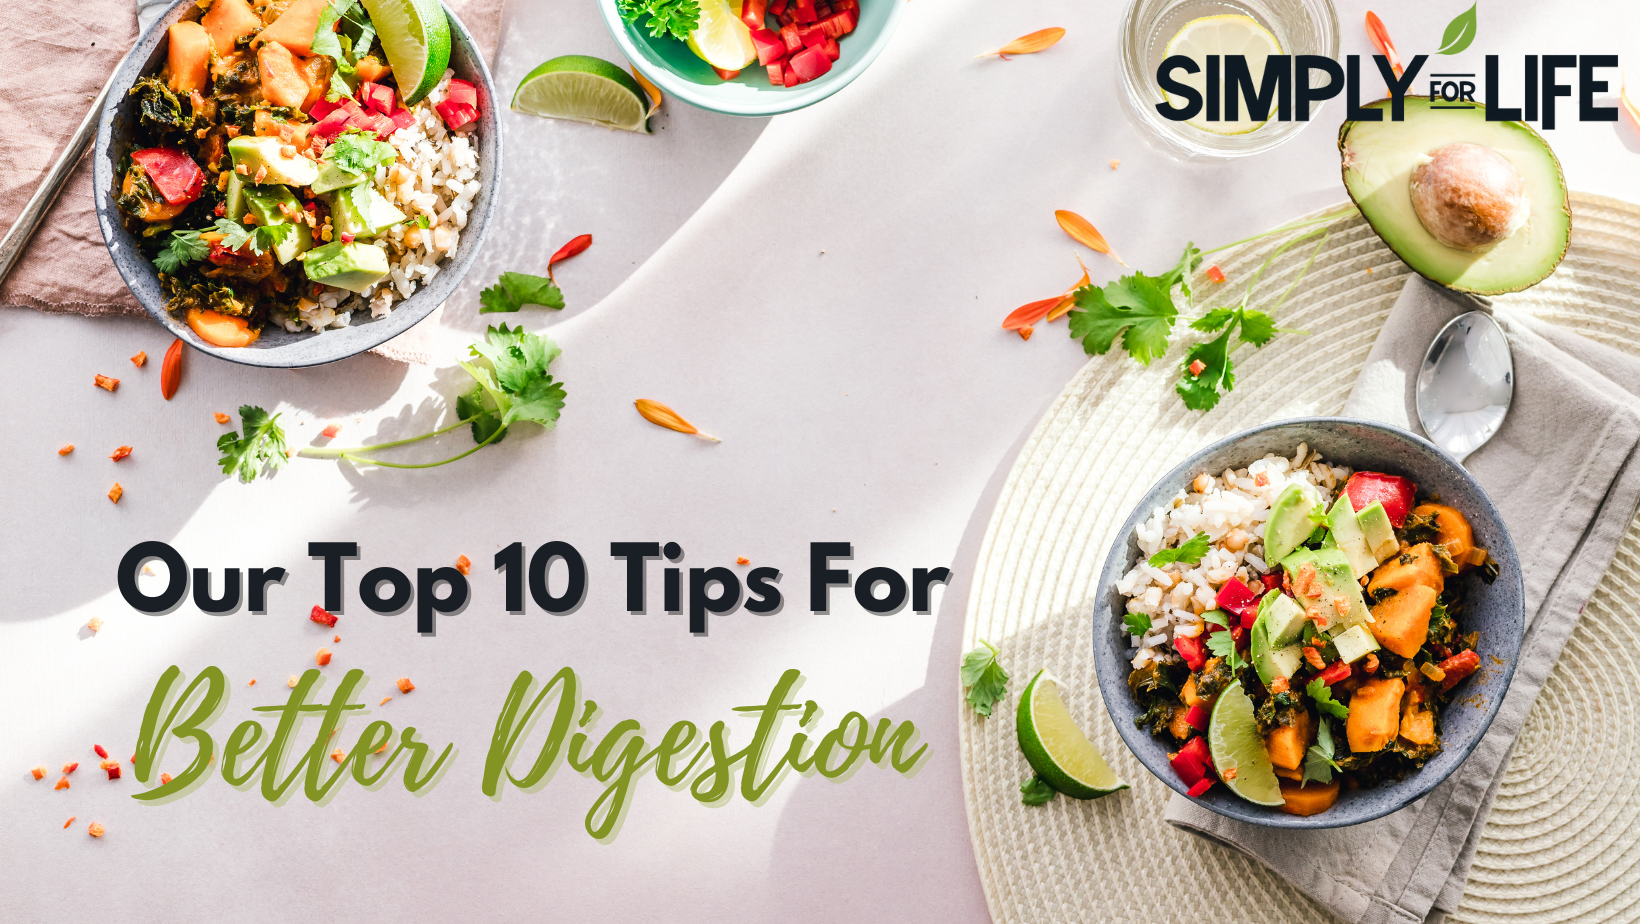 OUR TOP 10 TIPS FOR (3)